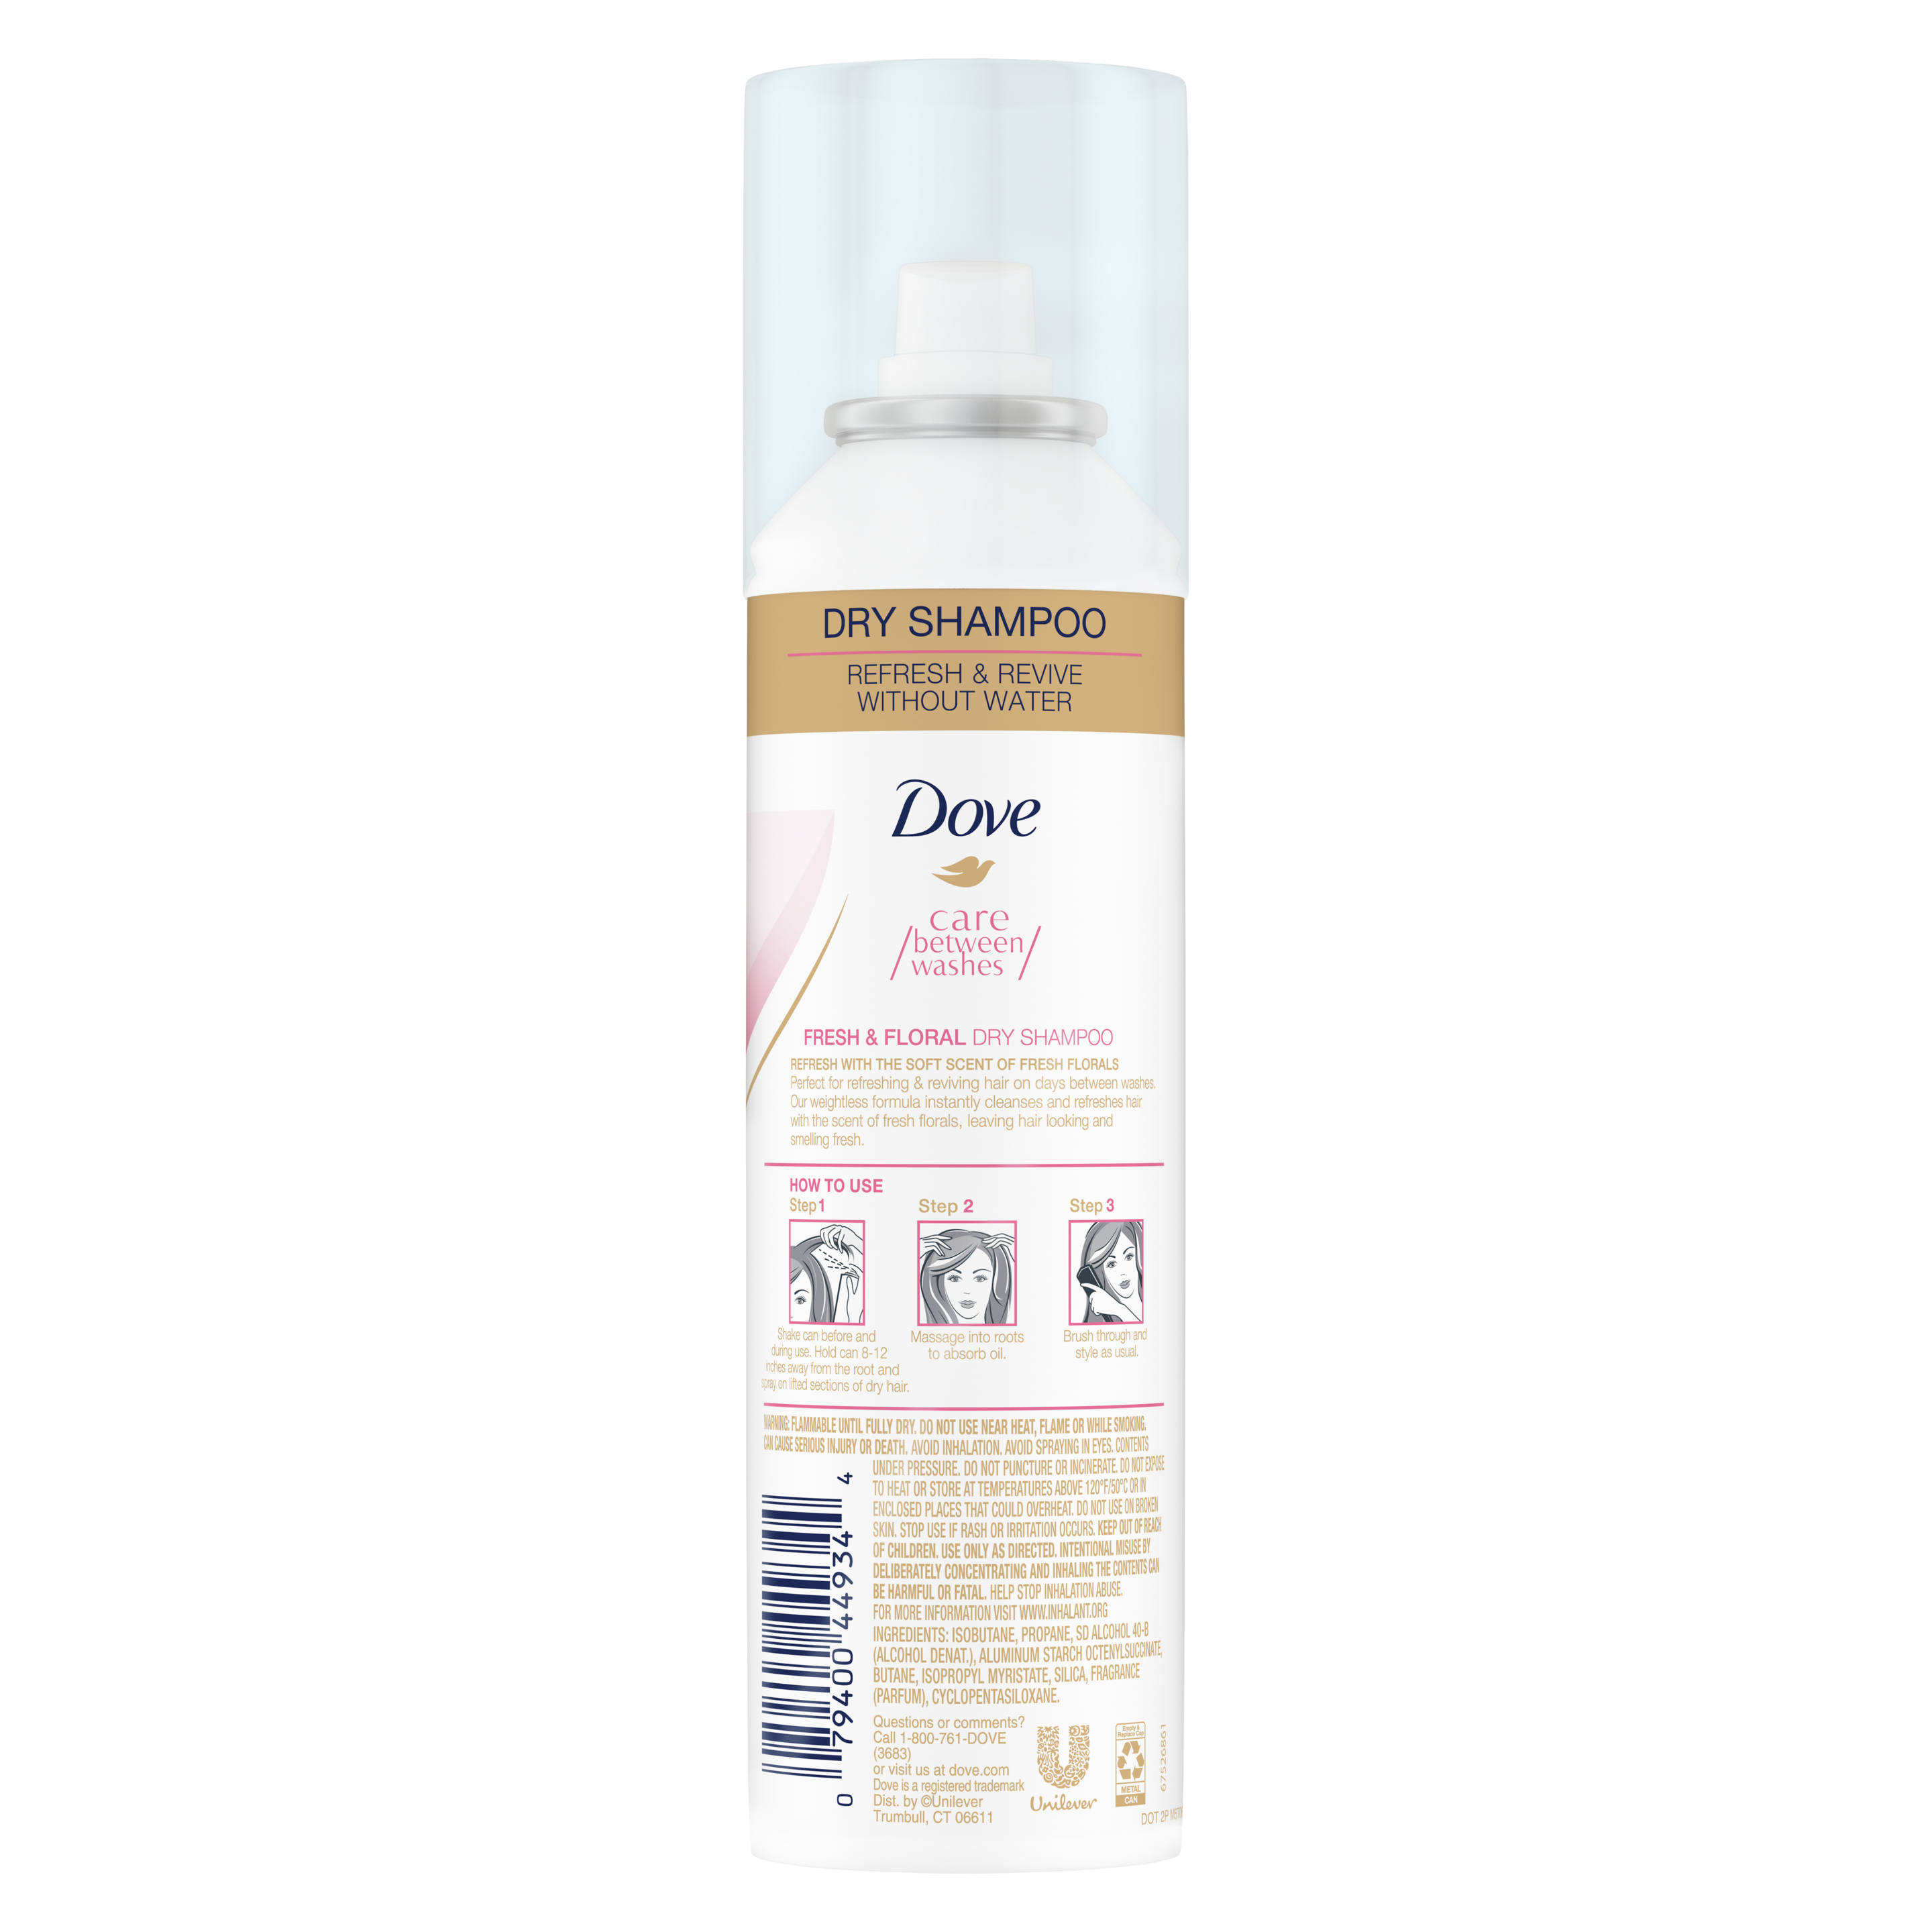 Dove Fresh and Floral Dry Shampoo 5 oz